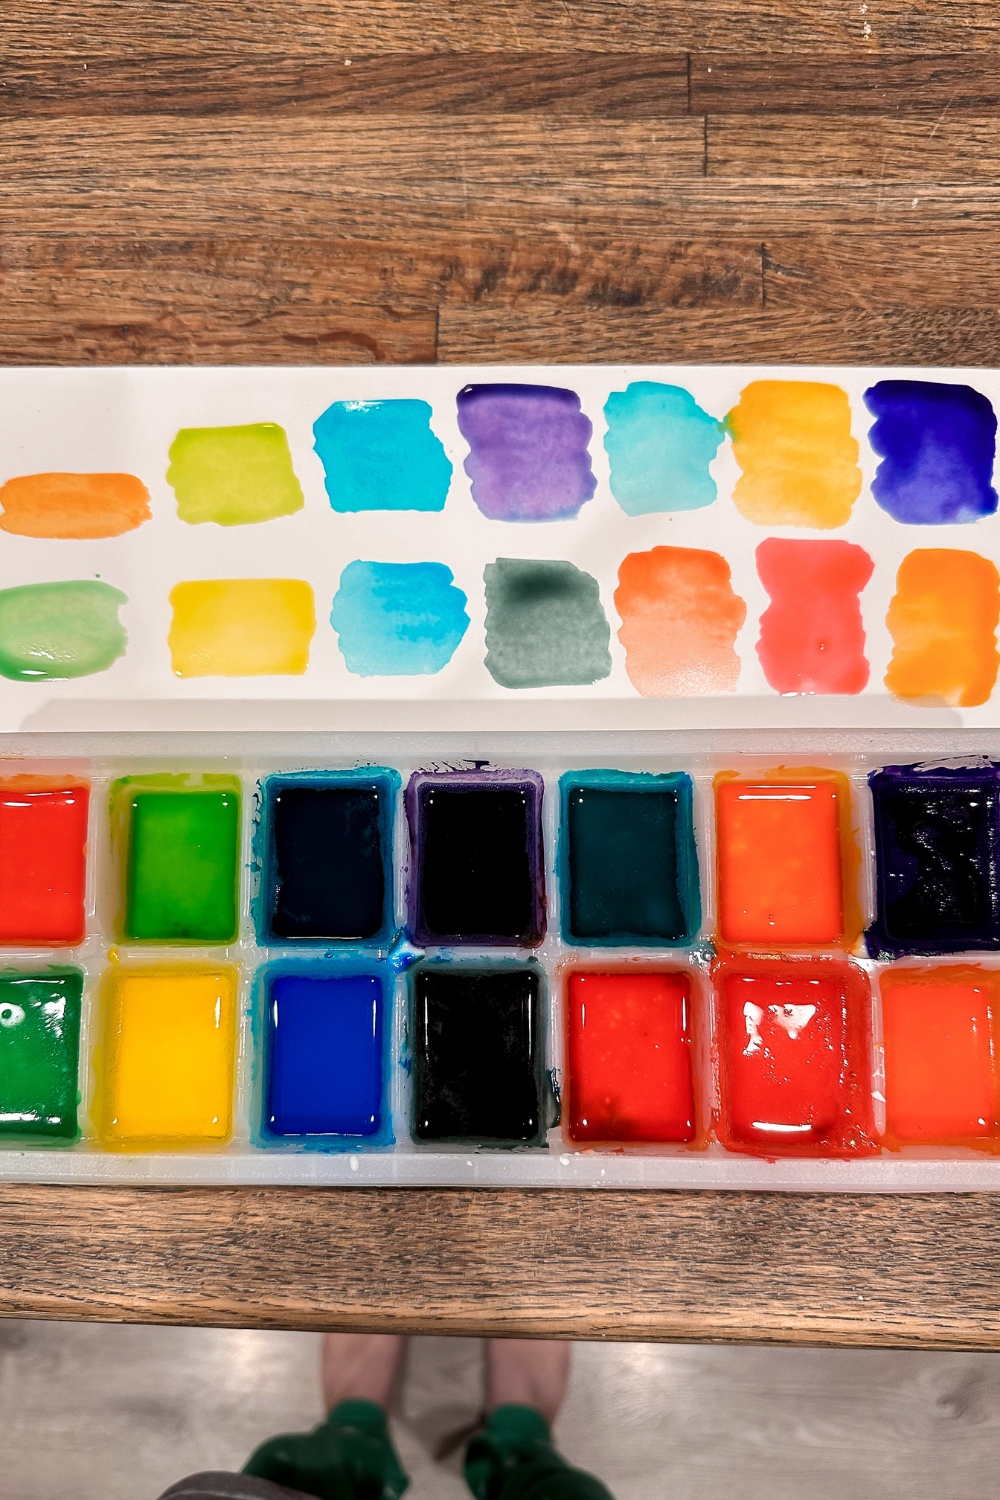 Homemade watercolor paints in a ice cube tray. Paints are swatched above the tray and the swatches are wet.